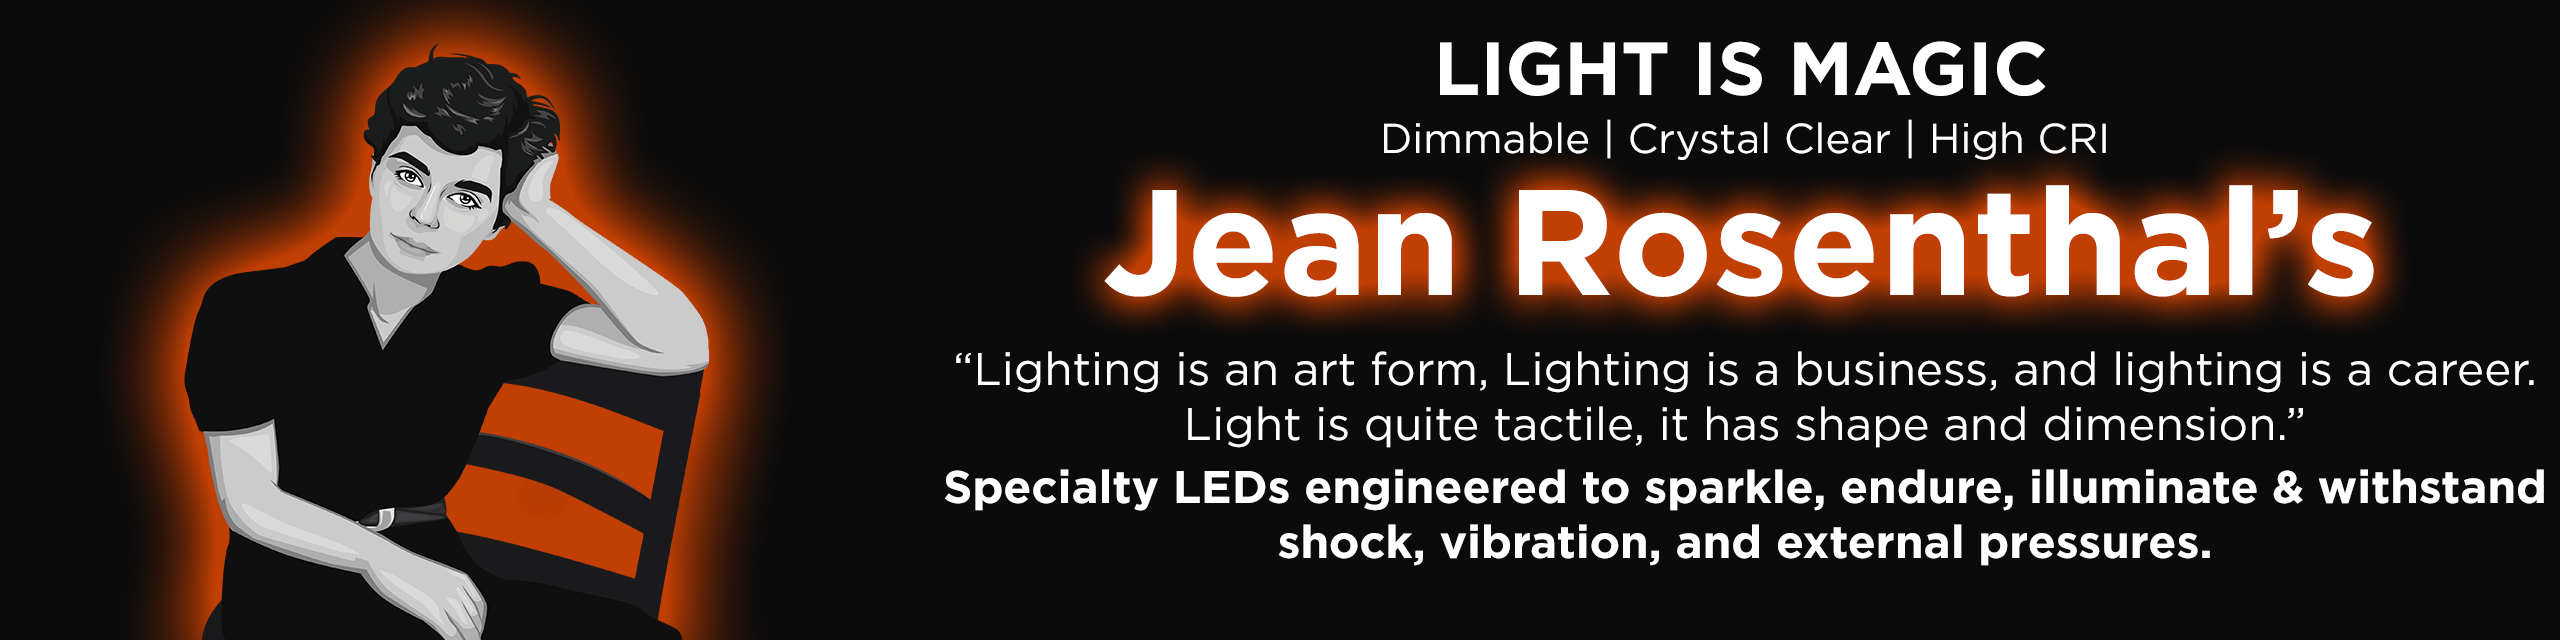 Specialty LEDs engineered to sparkle, endure, illuminate and withstand shock and vibration.